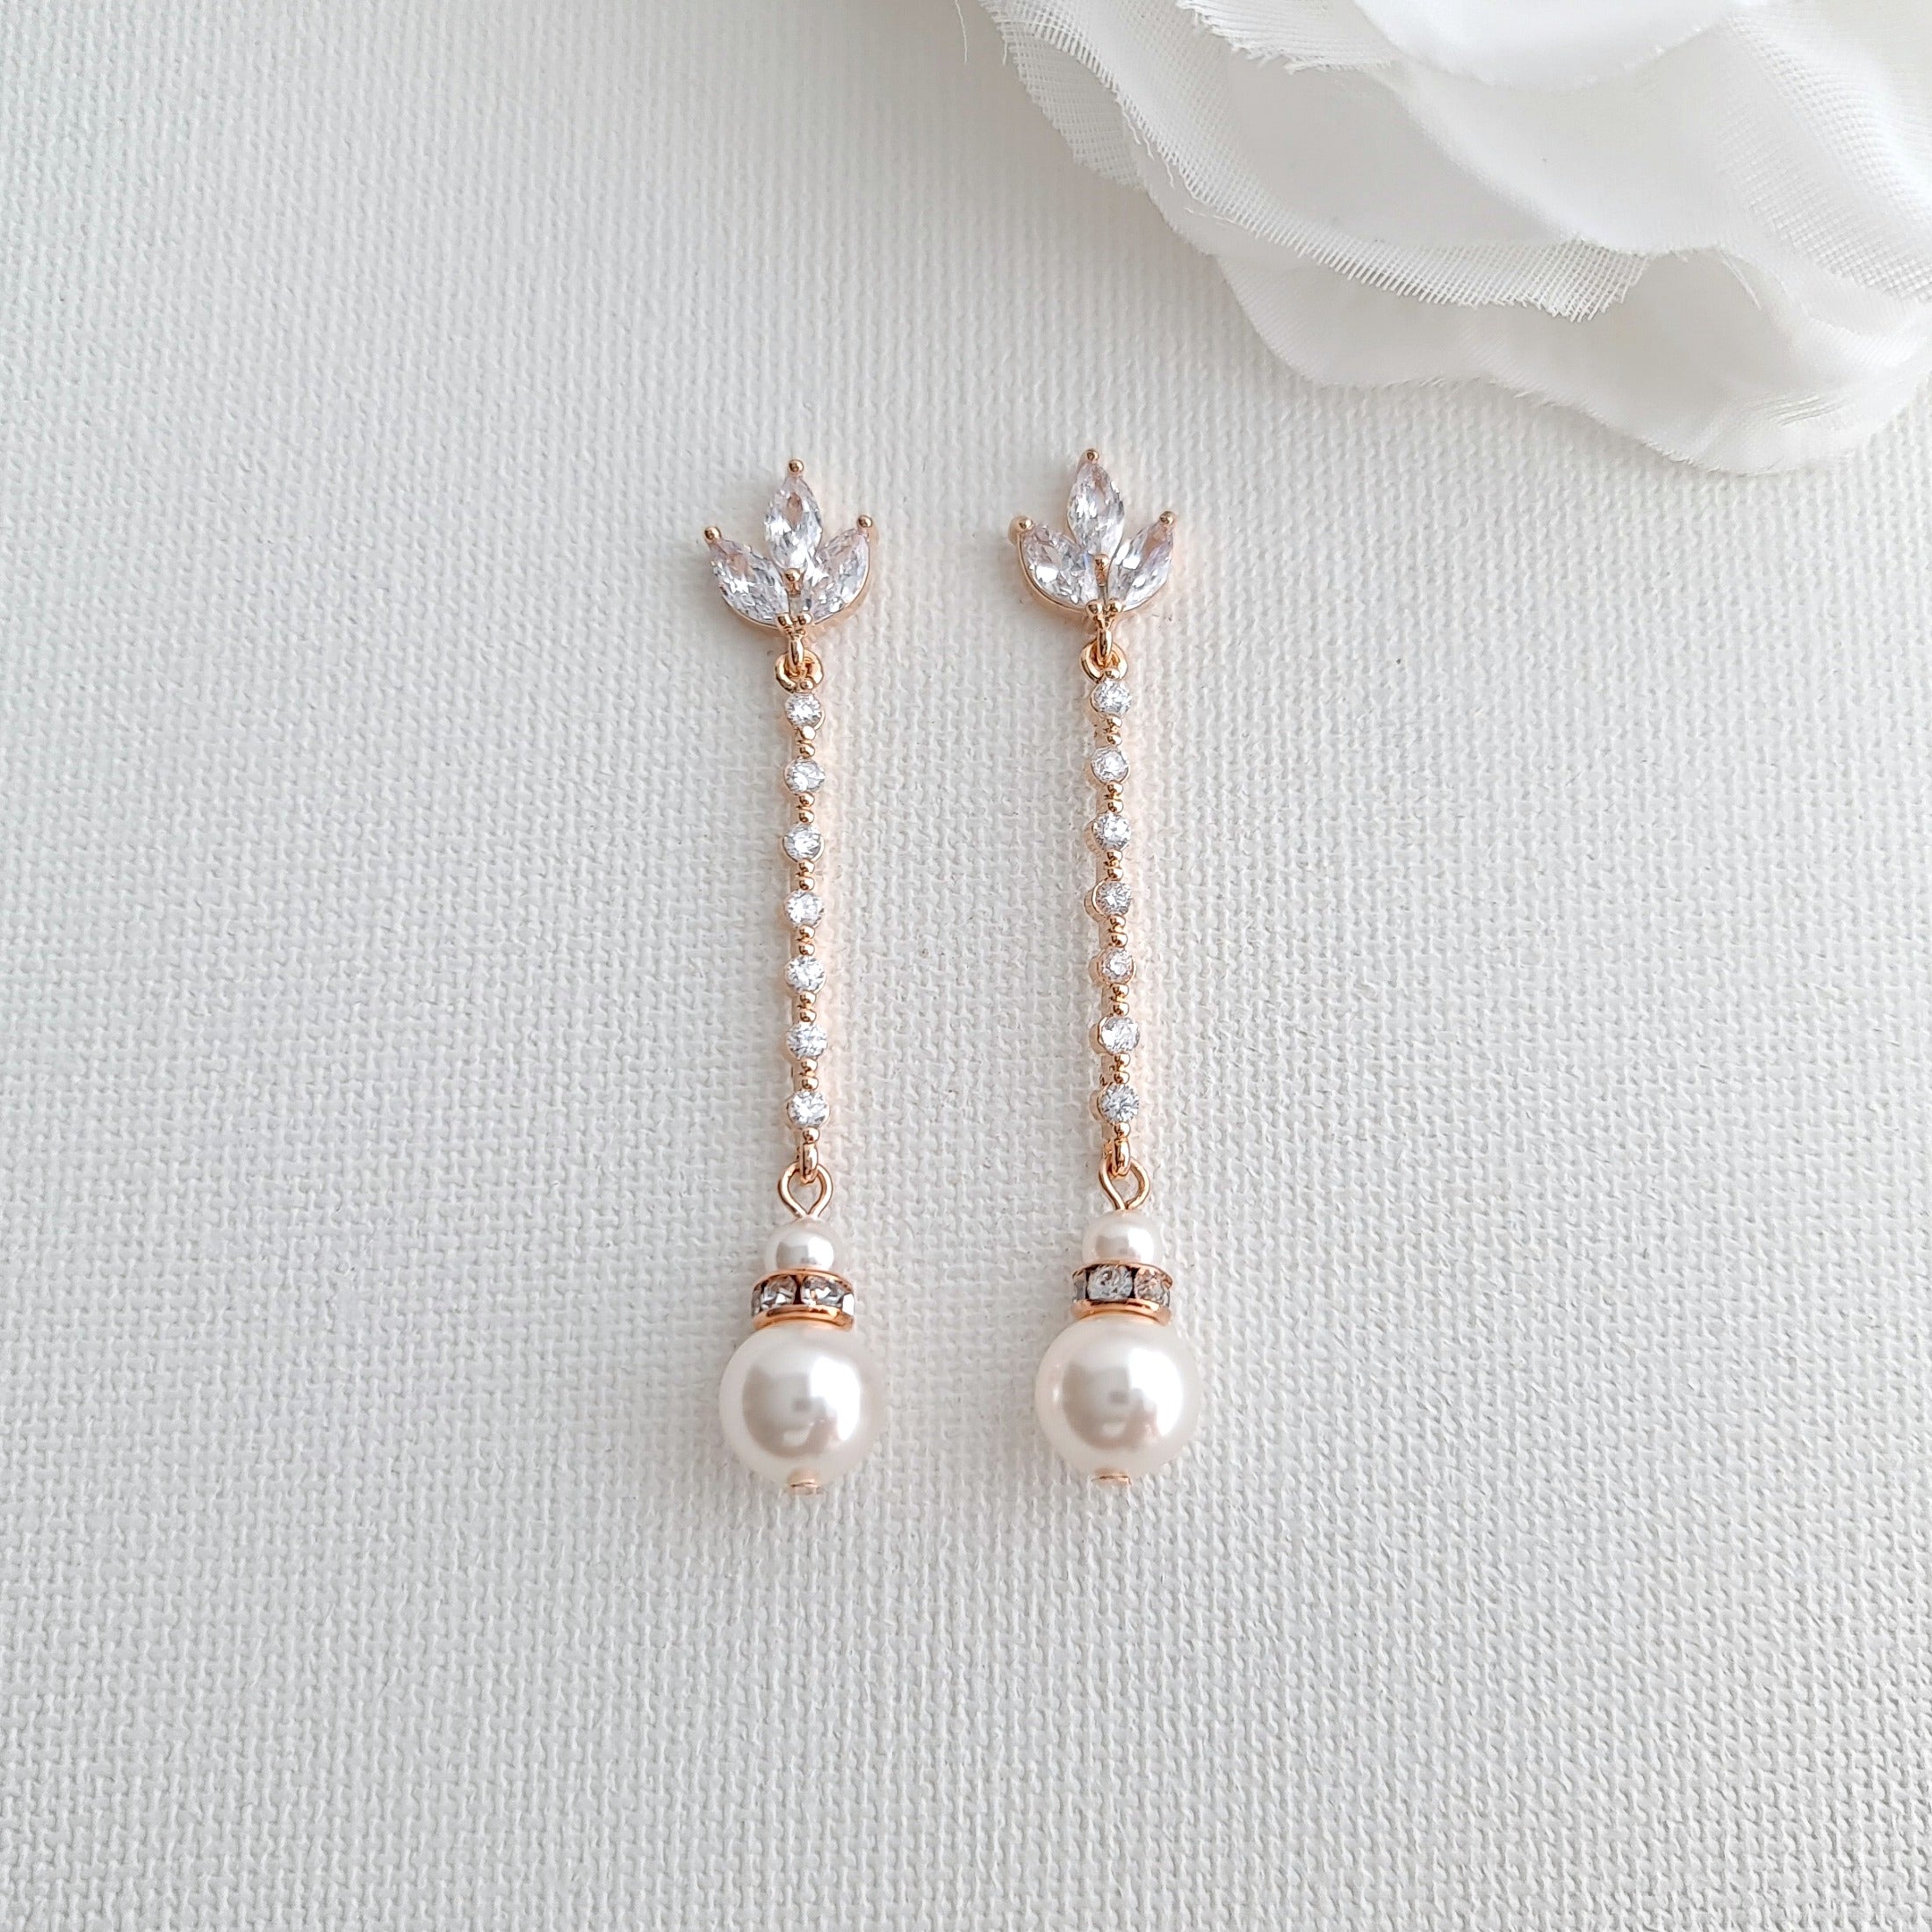 The Charis Blue Stone Pearl Drop Earring